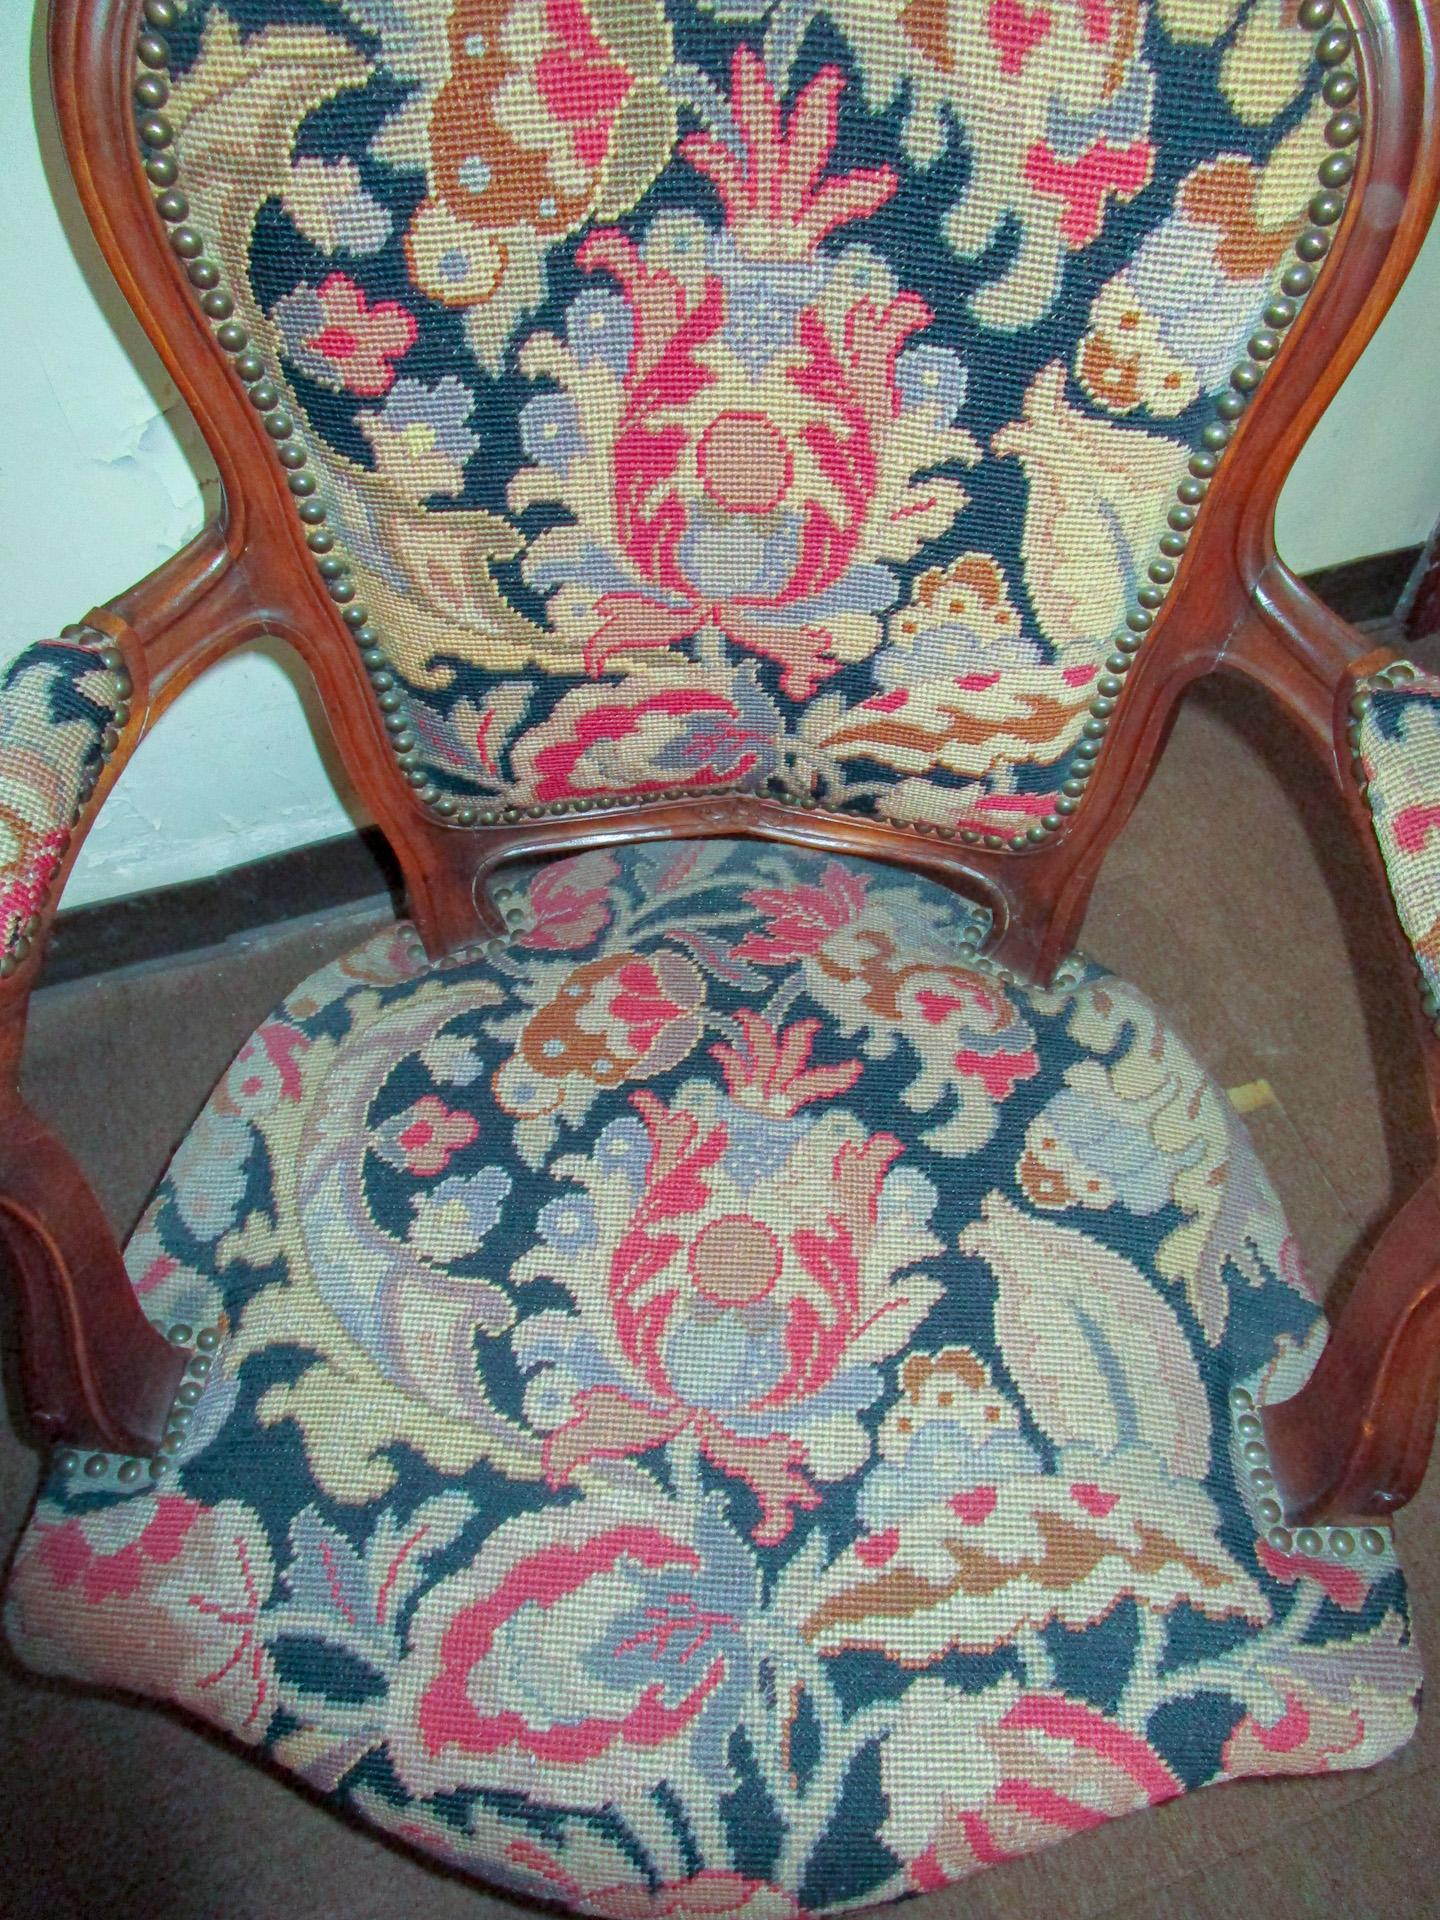 This lovely matching pair of fauteuils with walnut frames feature carved serpentine backs, arms, legs and crests with flower decoration. The gorgeous color needle point upholstery is in pink and grey shades against a stunning black background. The